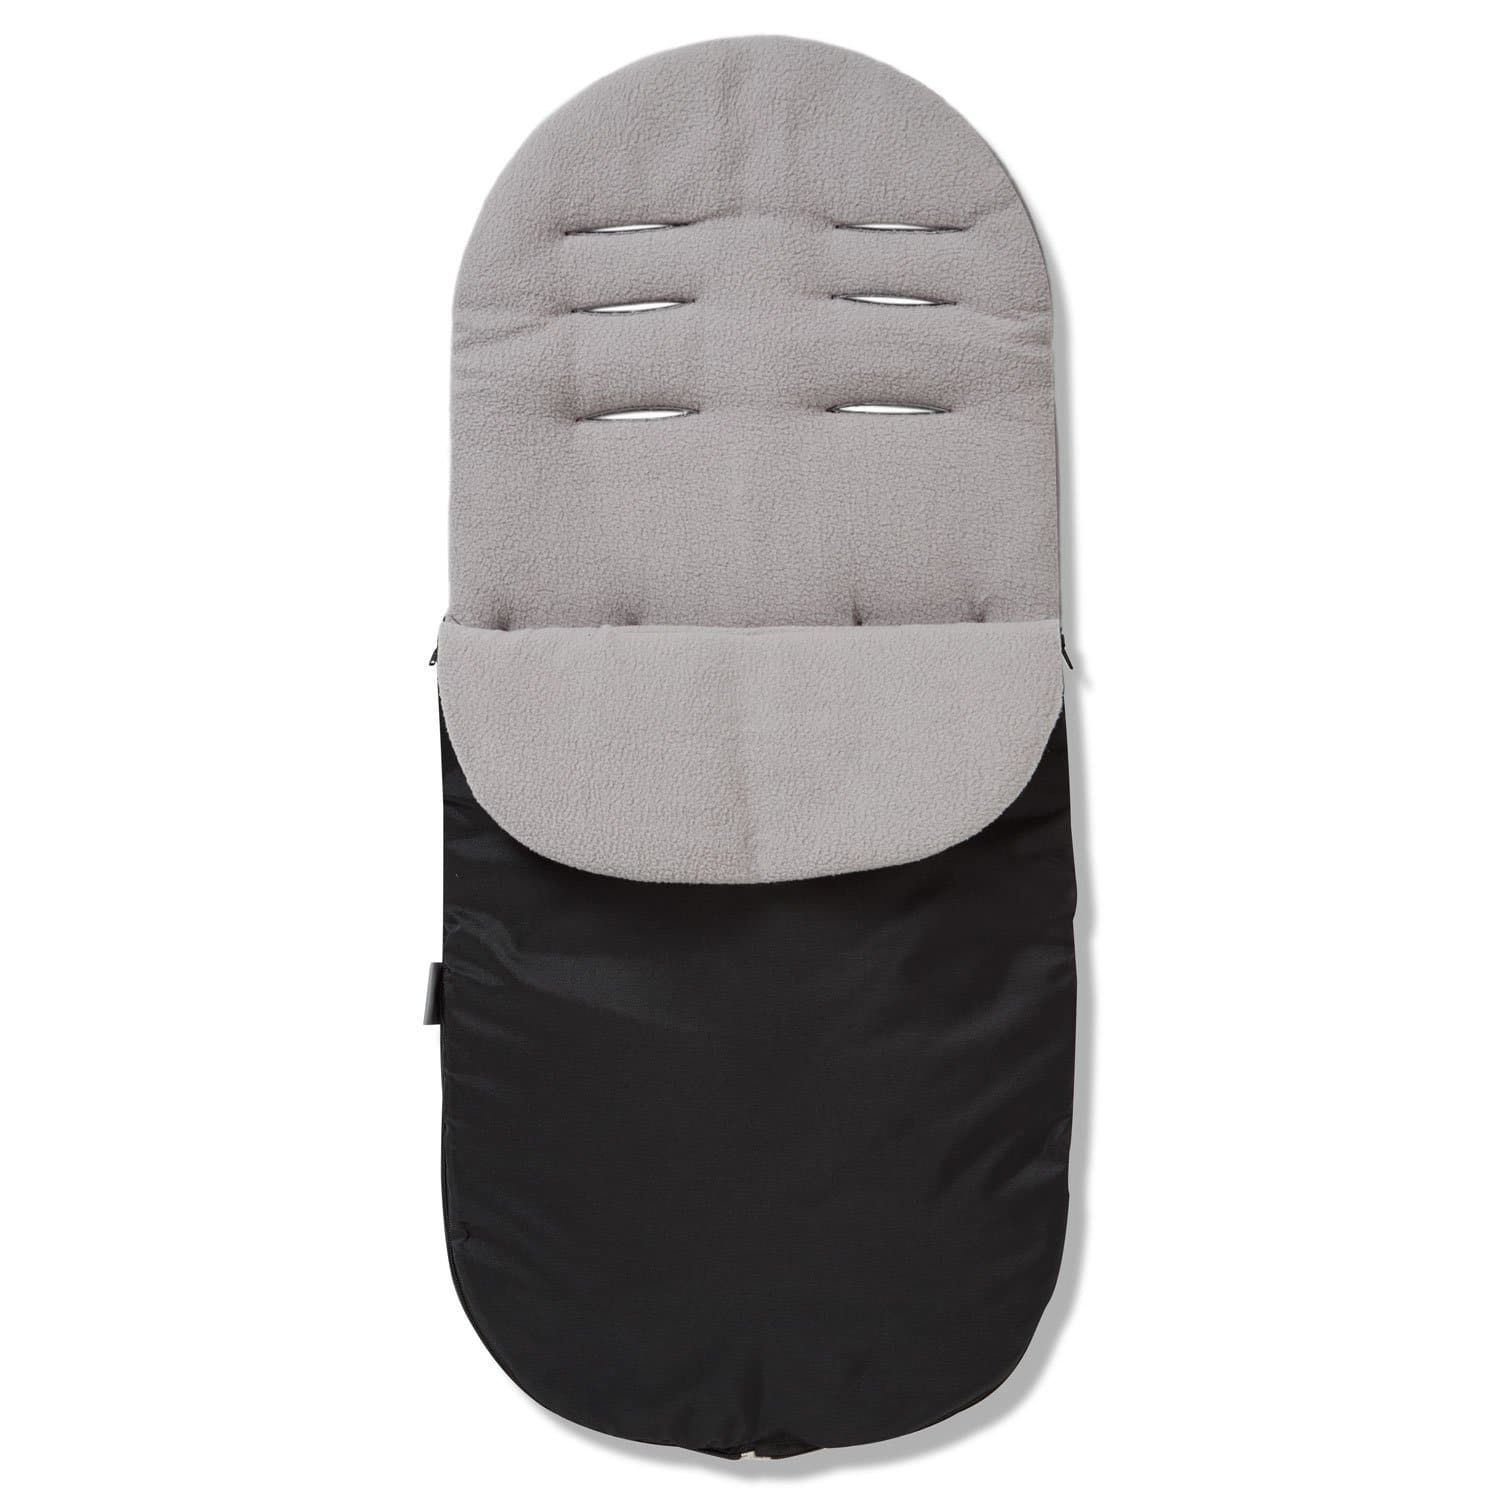 Footmuff / Cosy Toes Compatible with Koelstra - Grey / Fits All Models | For Your Little One